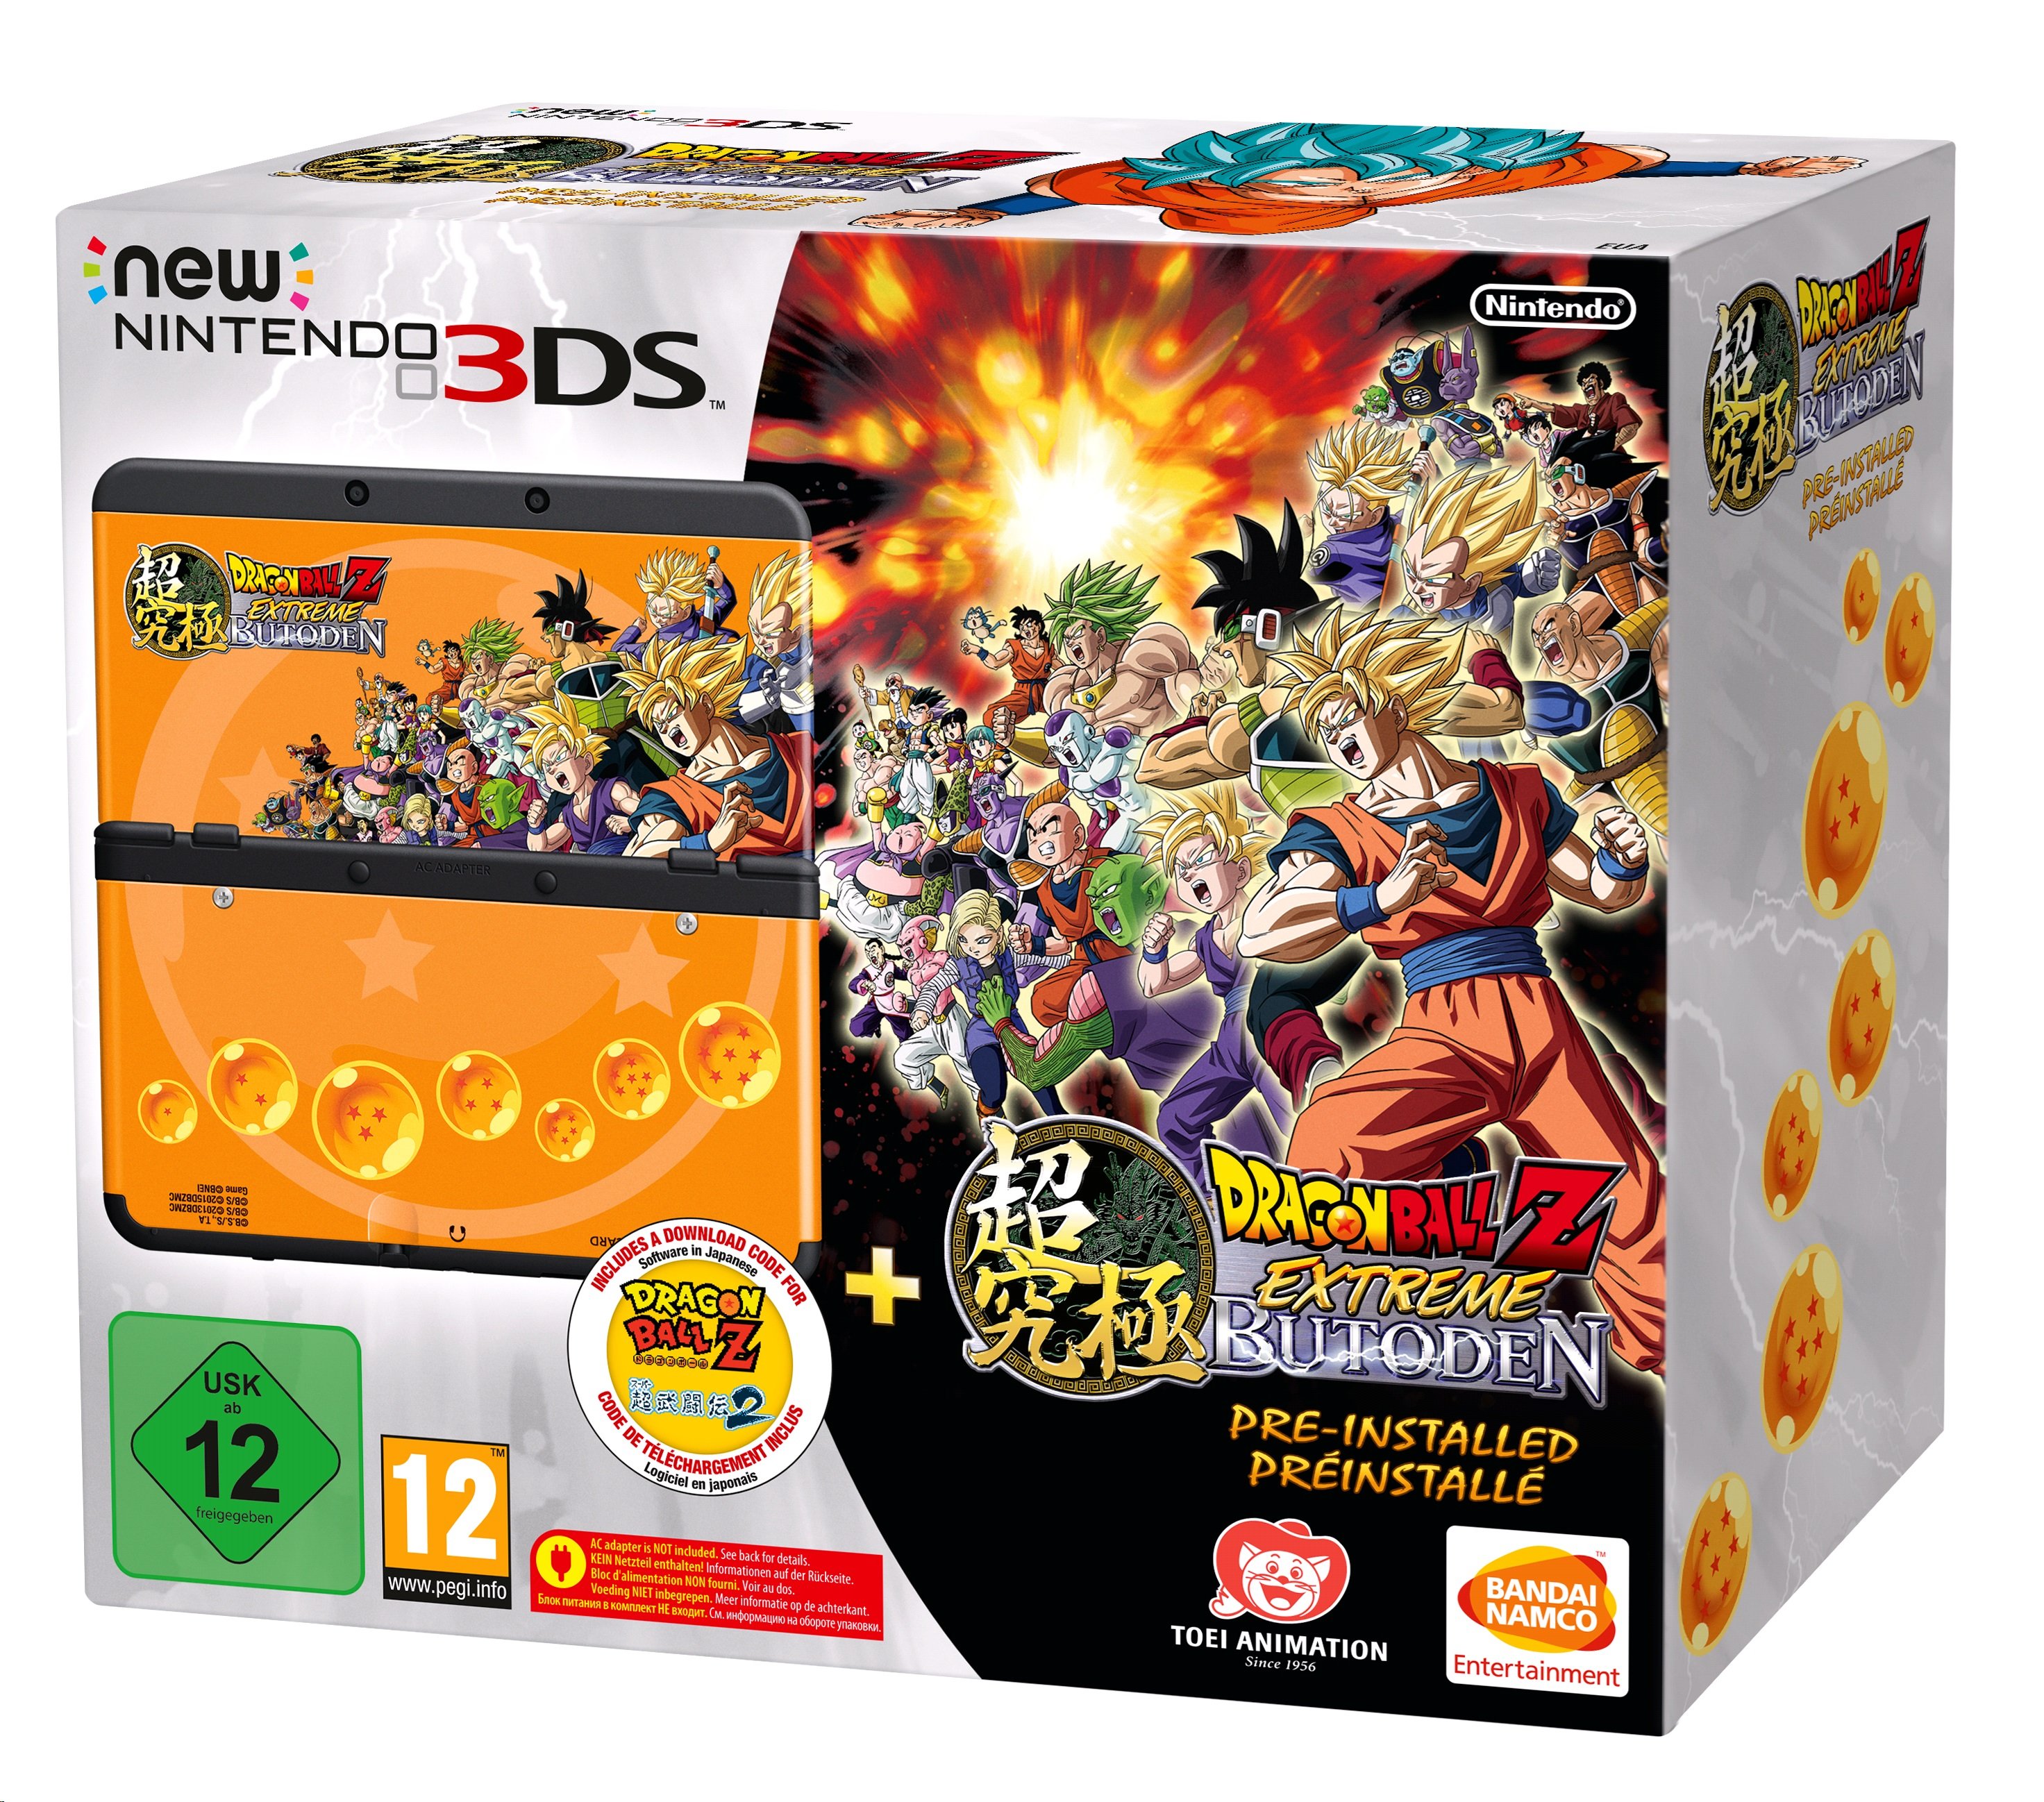 kaupa-new-nintendo-3ds-console-dragon-ball-z-extreme-butoden-edition